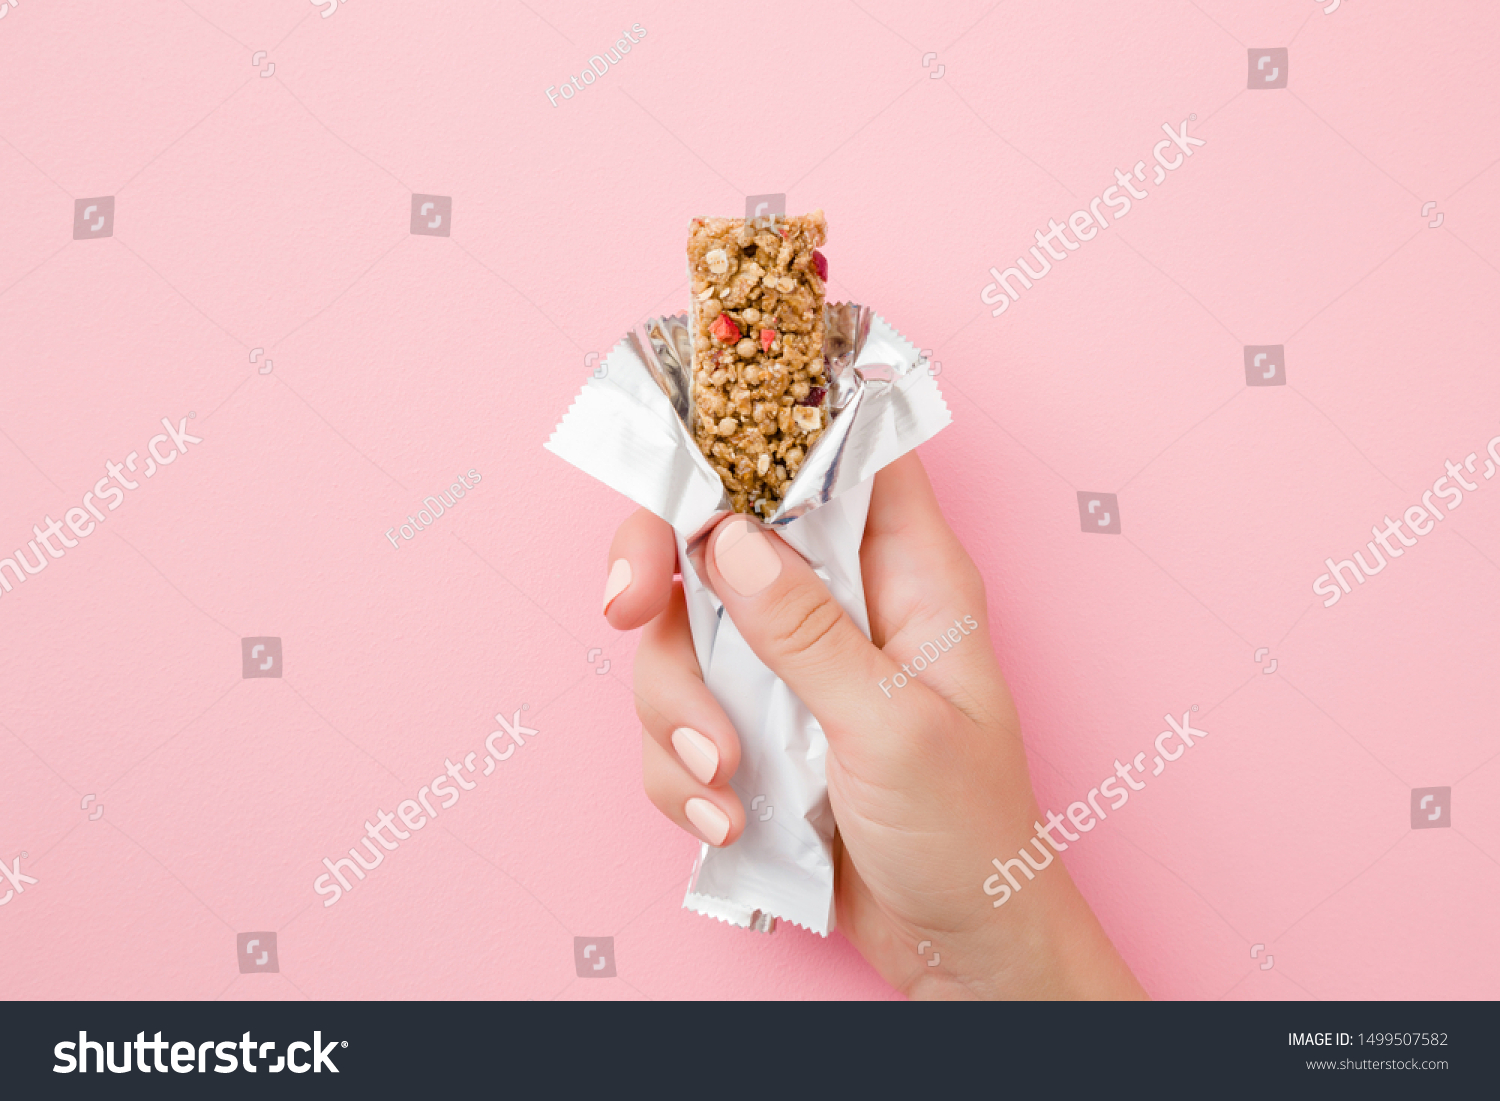 Young woman hand holding cereal bar on pastel pink table. Opened white pack. Closeup. Sweet healthy food. #1499507582